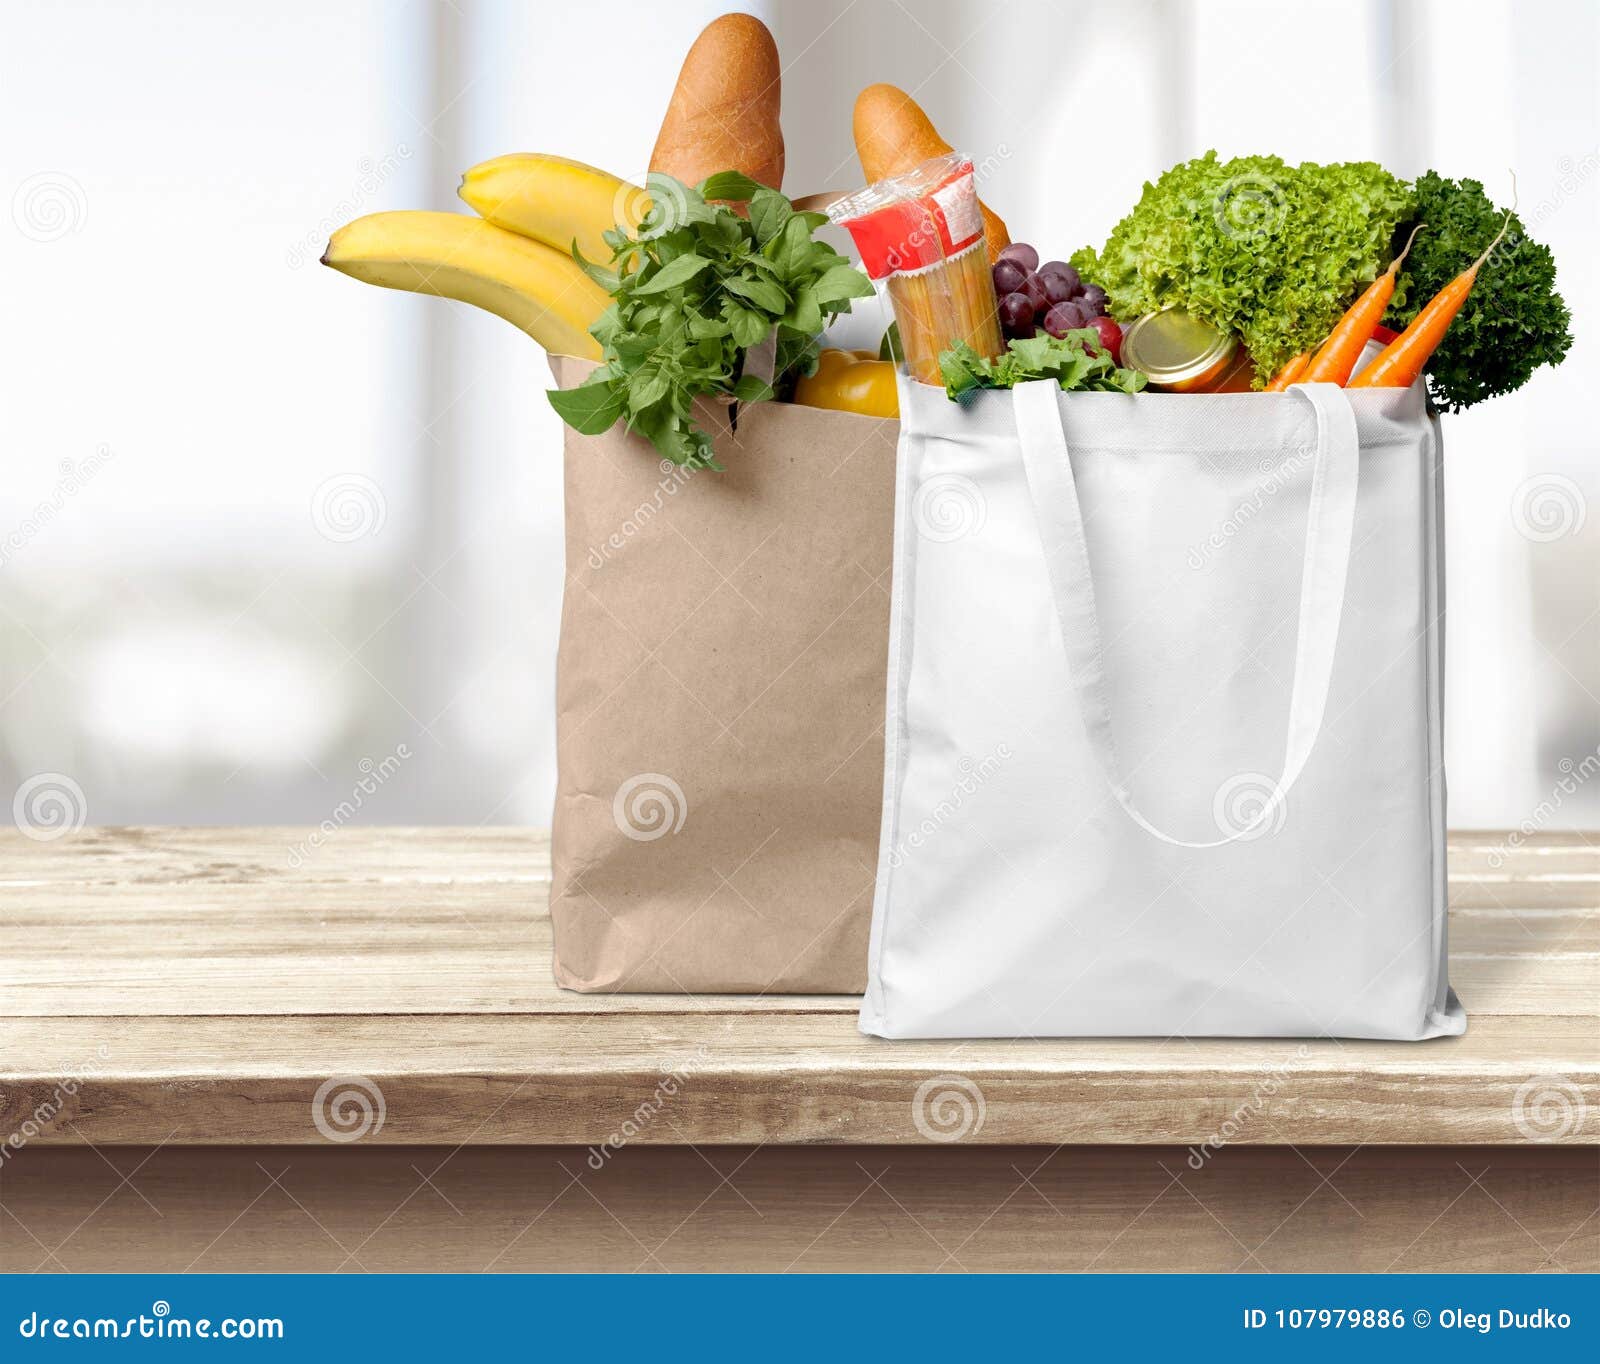 Plastic Bags (white, Transparent) For Grocery Store, Shopping Bag,  Restaurant, Convenience Store Use, Food Bag Supermarket Store Shopping Tote Bag  Disposable Takeaway Packing Bag - Temu